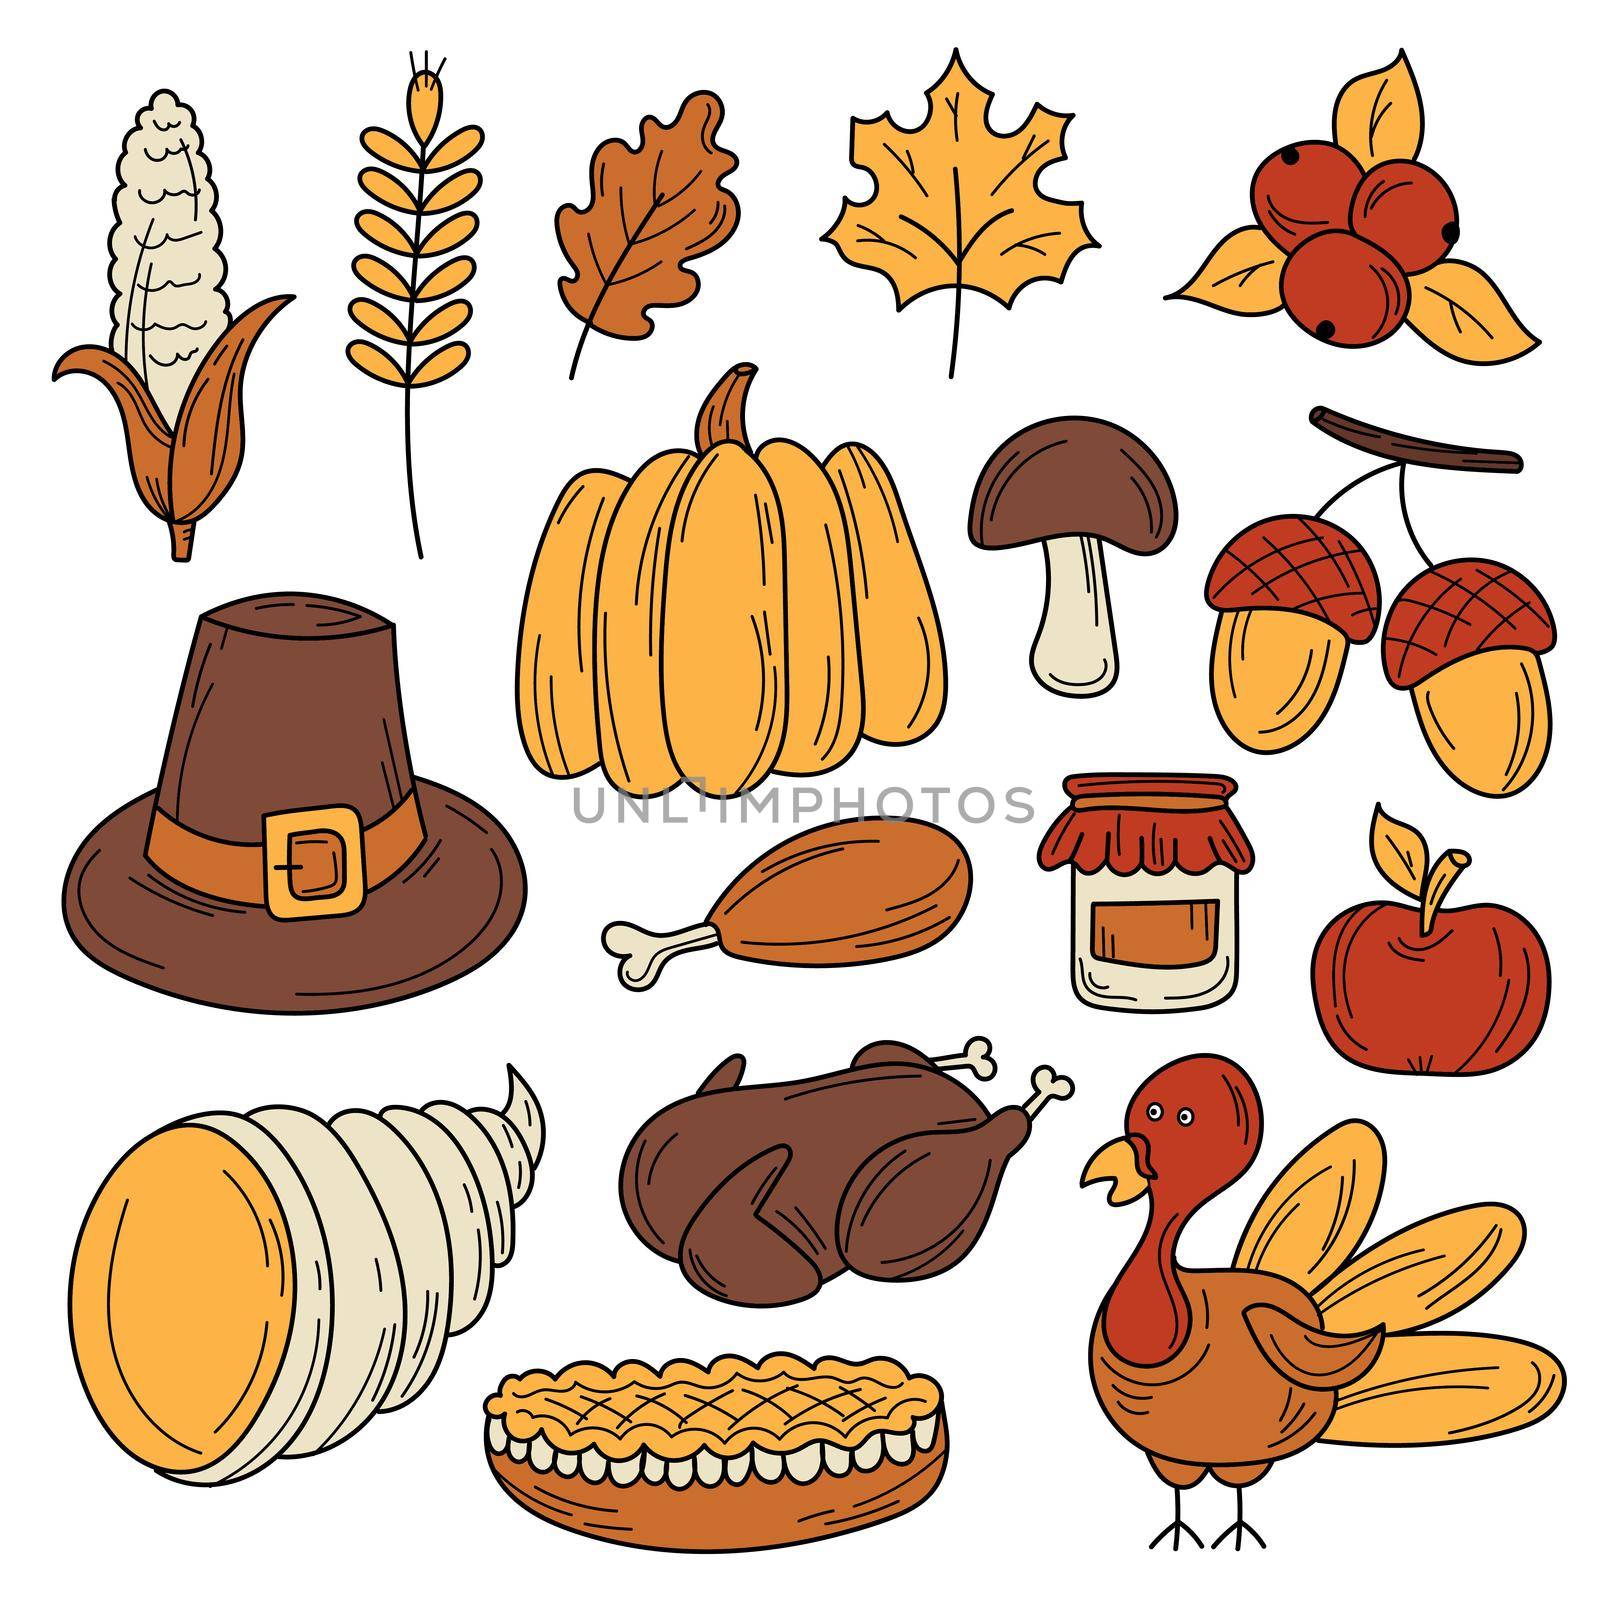 Colorful vector hand drawn doodle cartoon set of objects and symbols on the Thanksgiving autumn theme